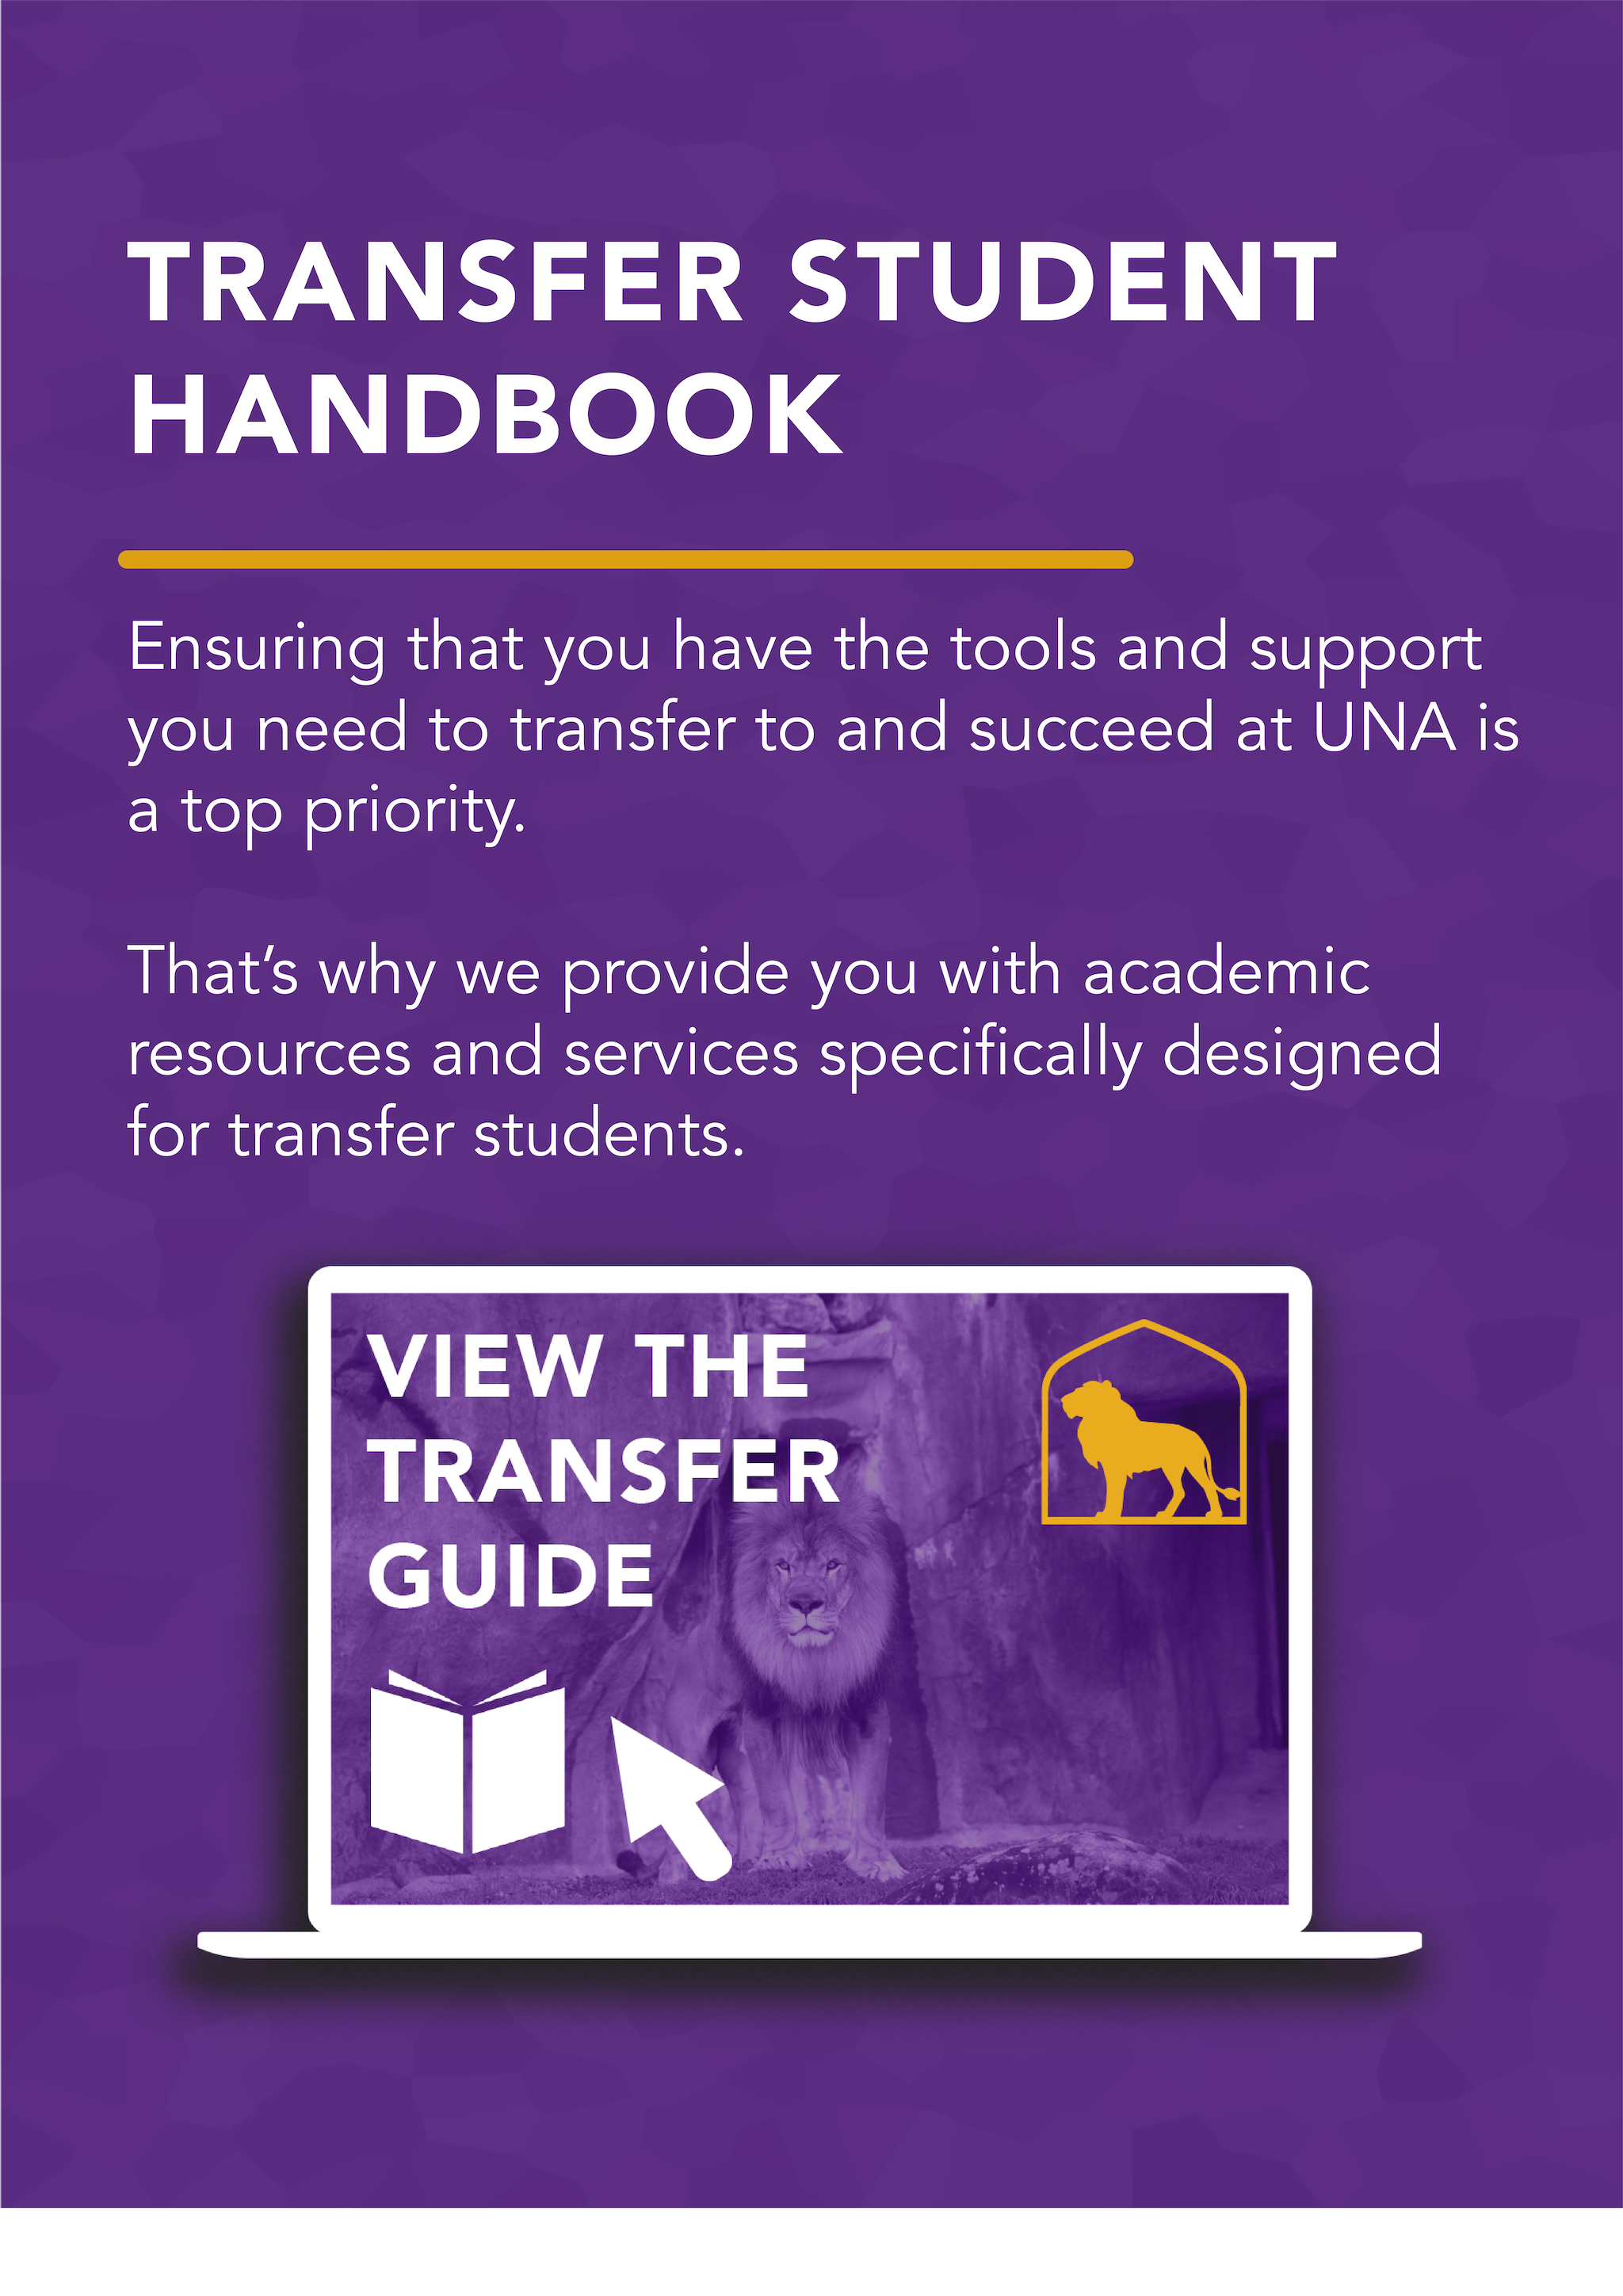 Transfer Student Handbook. Ensuring that yo uhave the tools and support you need to transfer to and succeed at UNA is a top priority. That's why we provide you with academic resources and services specifically designed for transfer students. Click to view the transfer guide PDF.